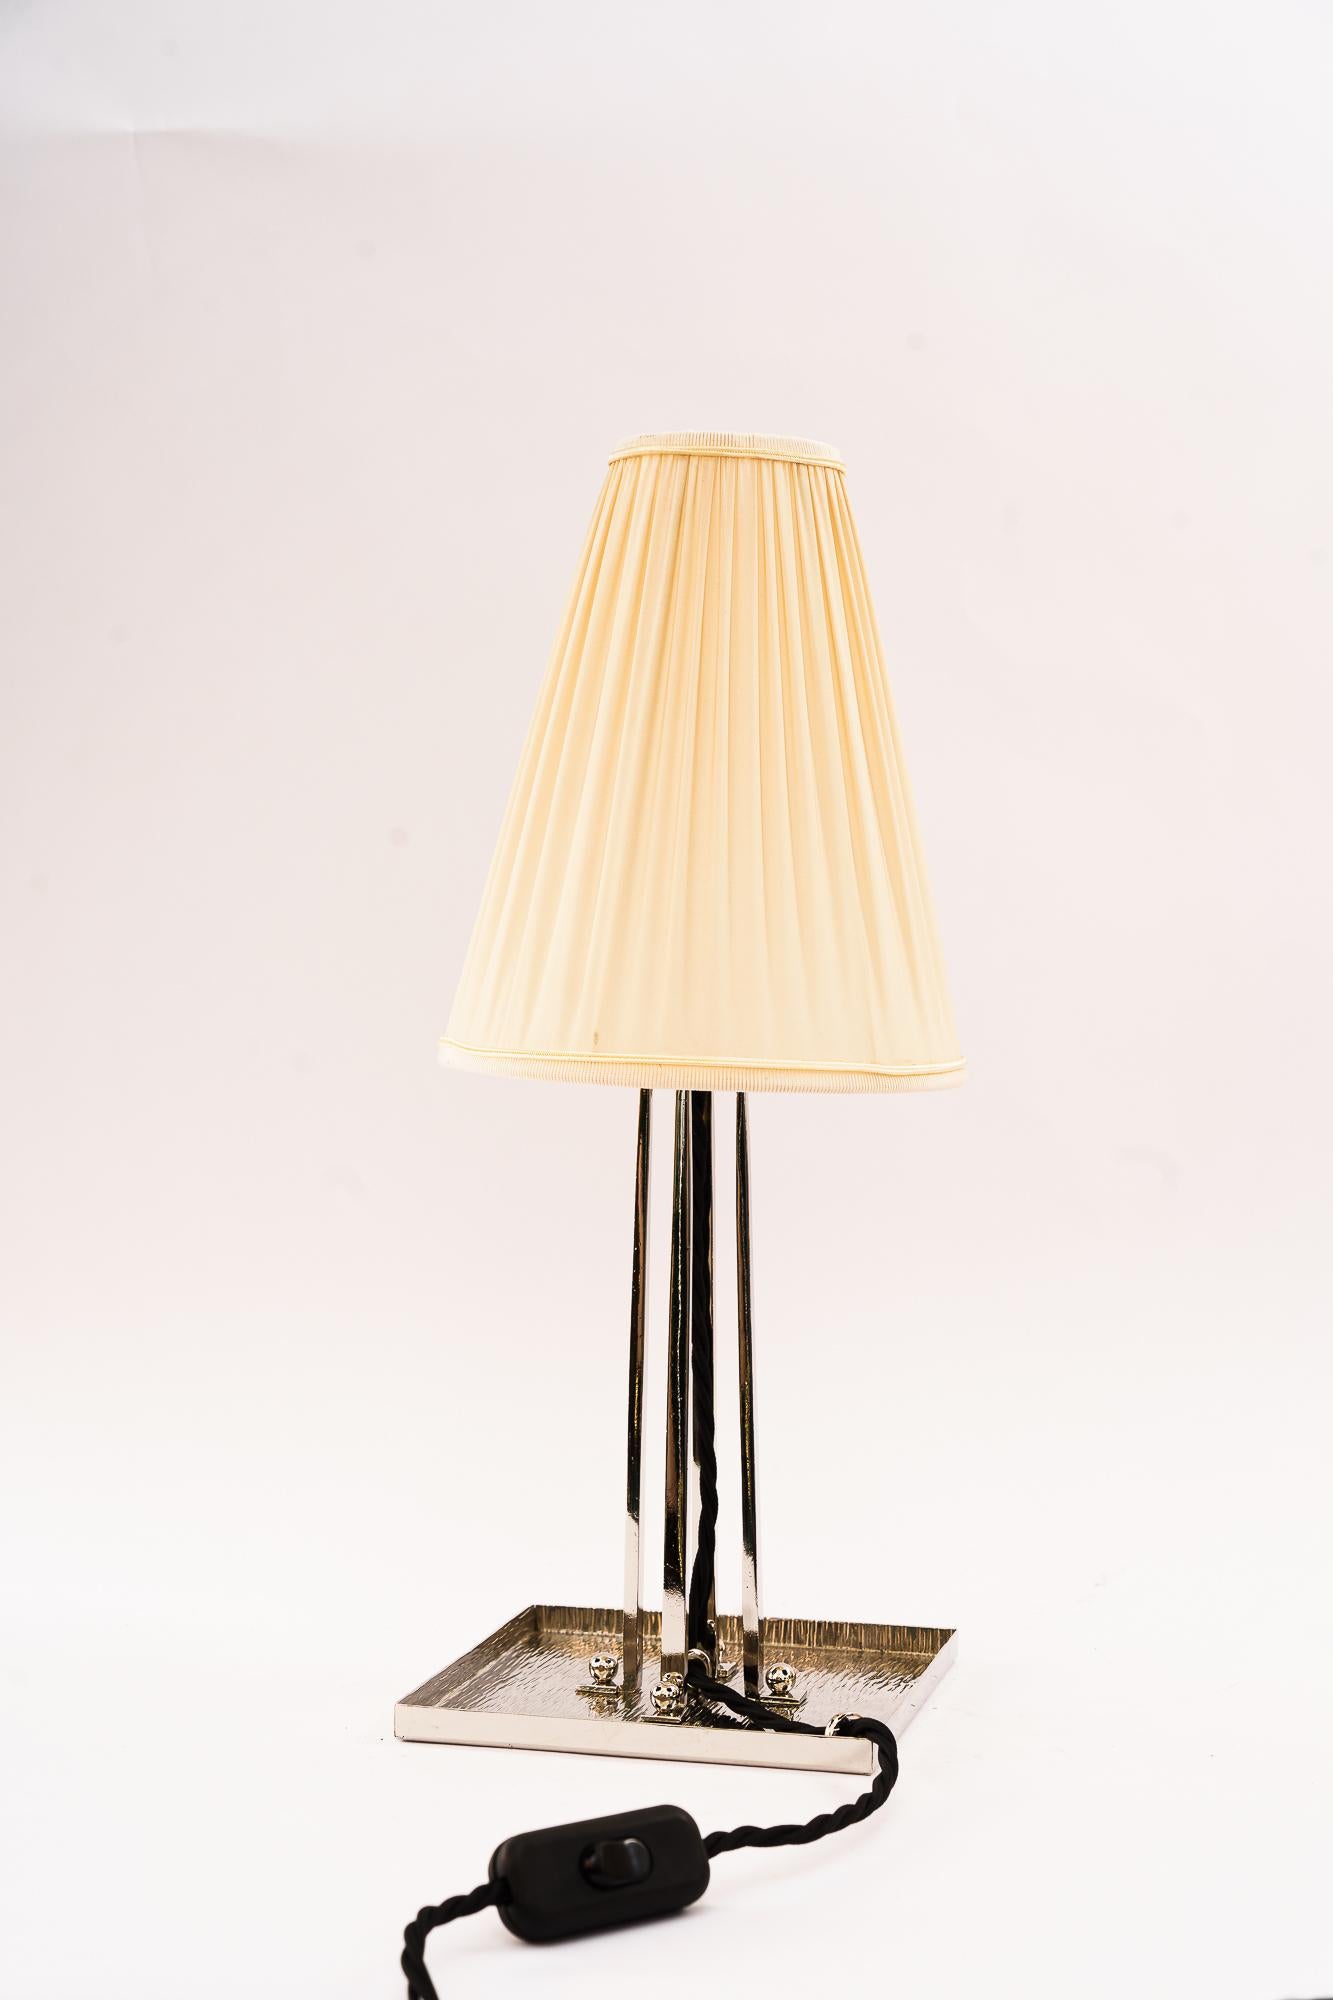 Art Deco nickel - plated table lamp with fabric shade around 1920s
Polished
